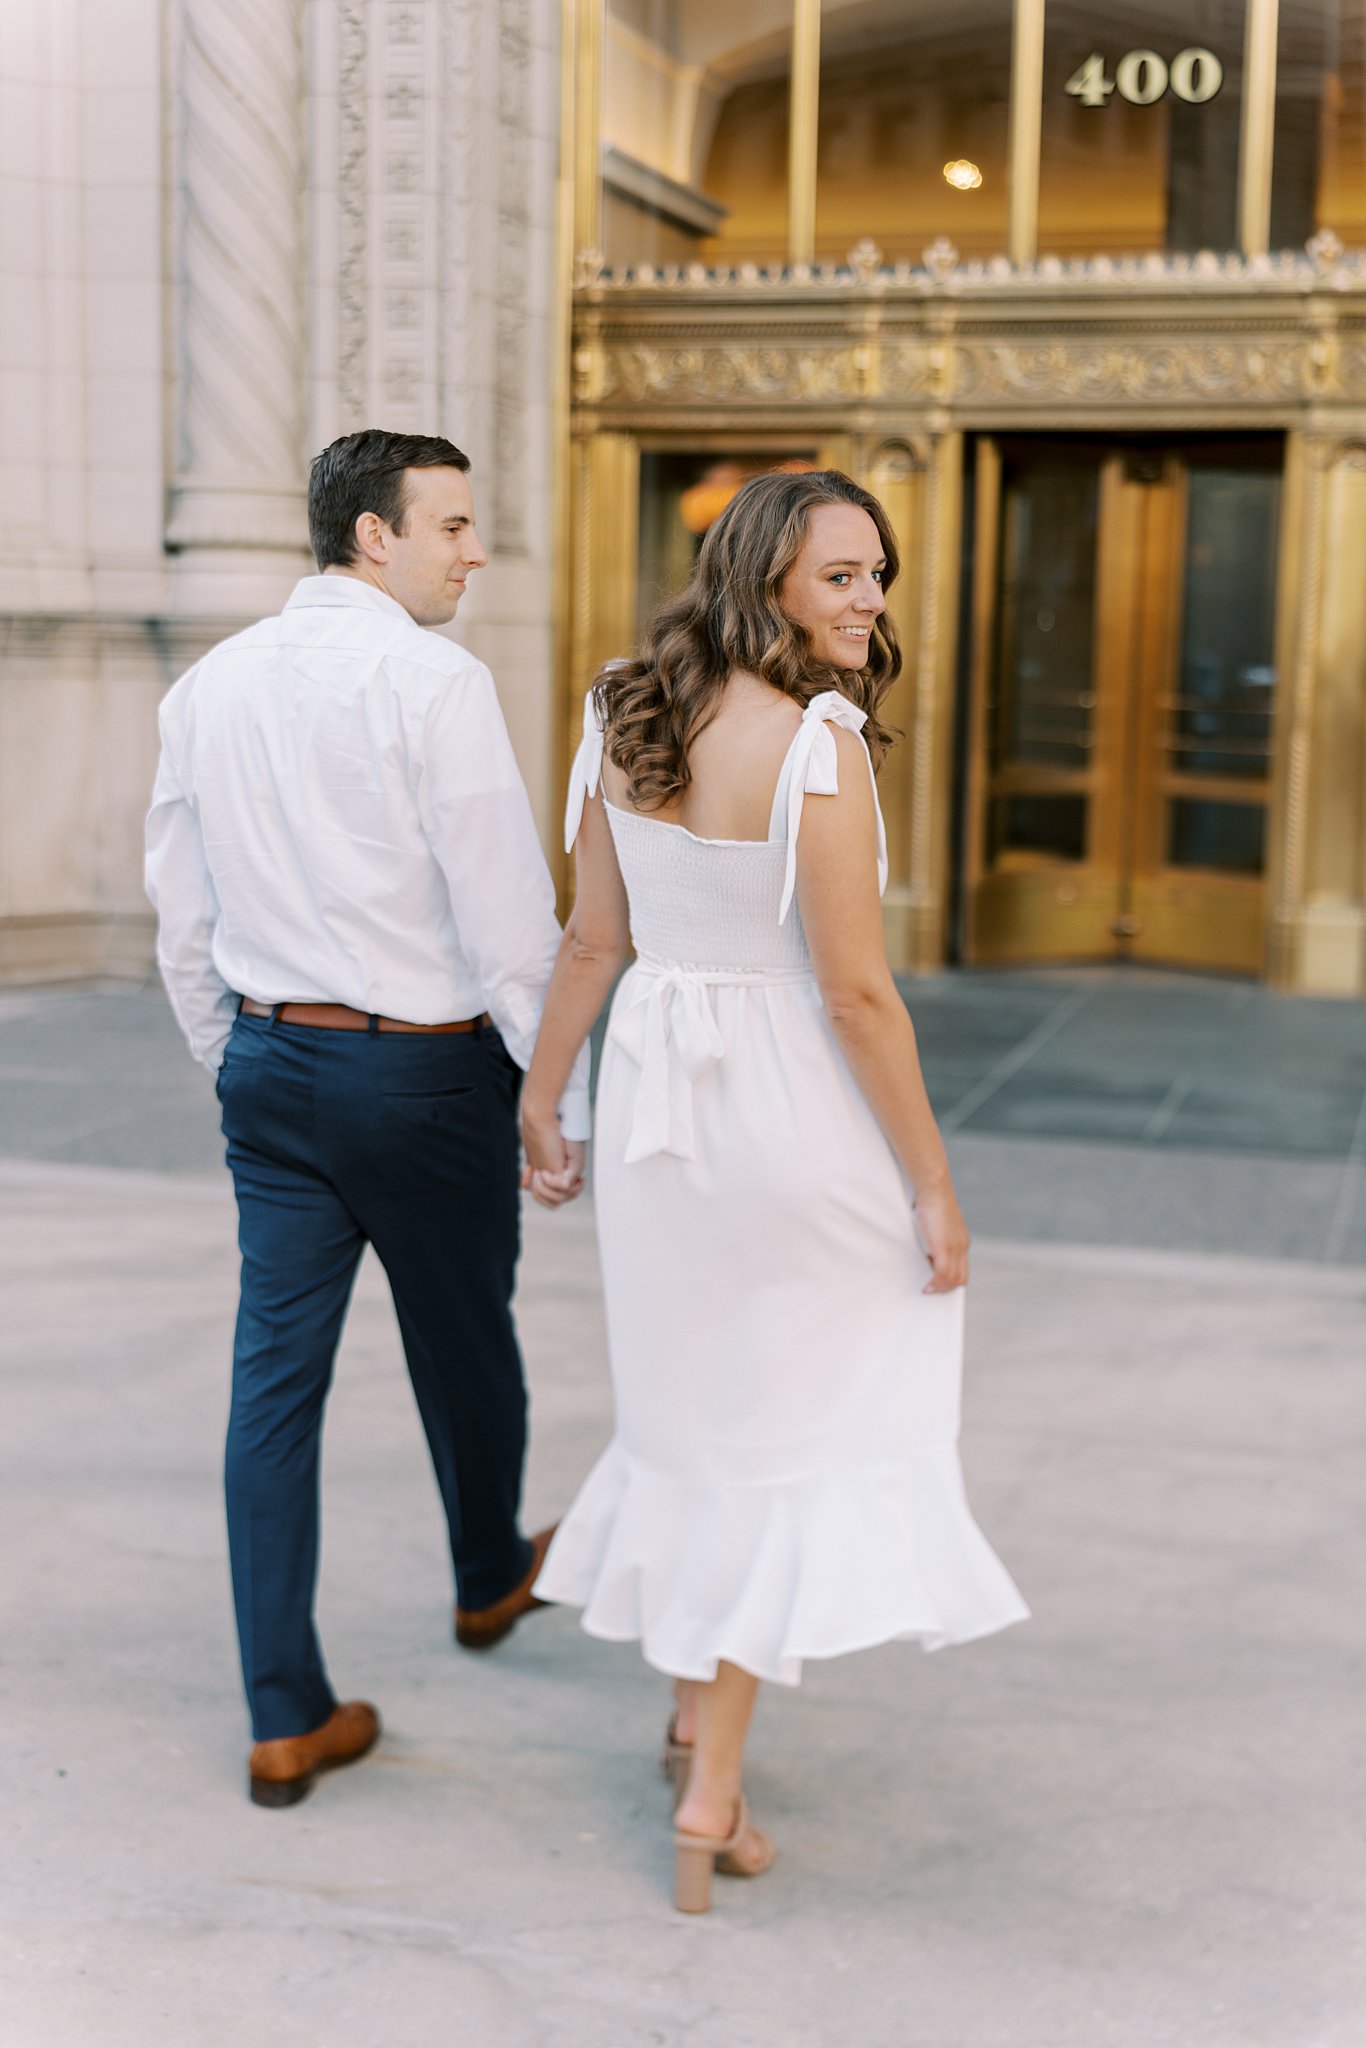 Downtown-Chicago-Engagement-Photos-at-The-Wrigley-Building-Chicago-Catholic-Wedding-Photographer-_0026